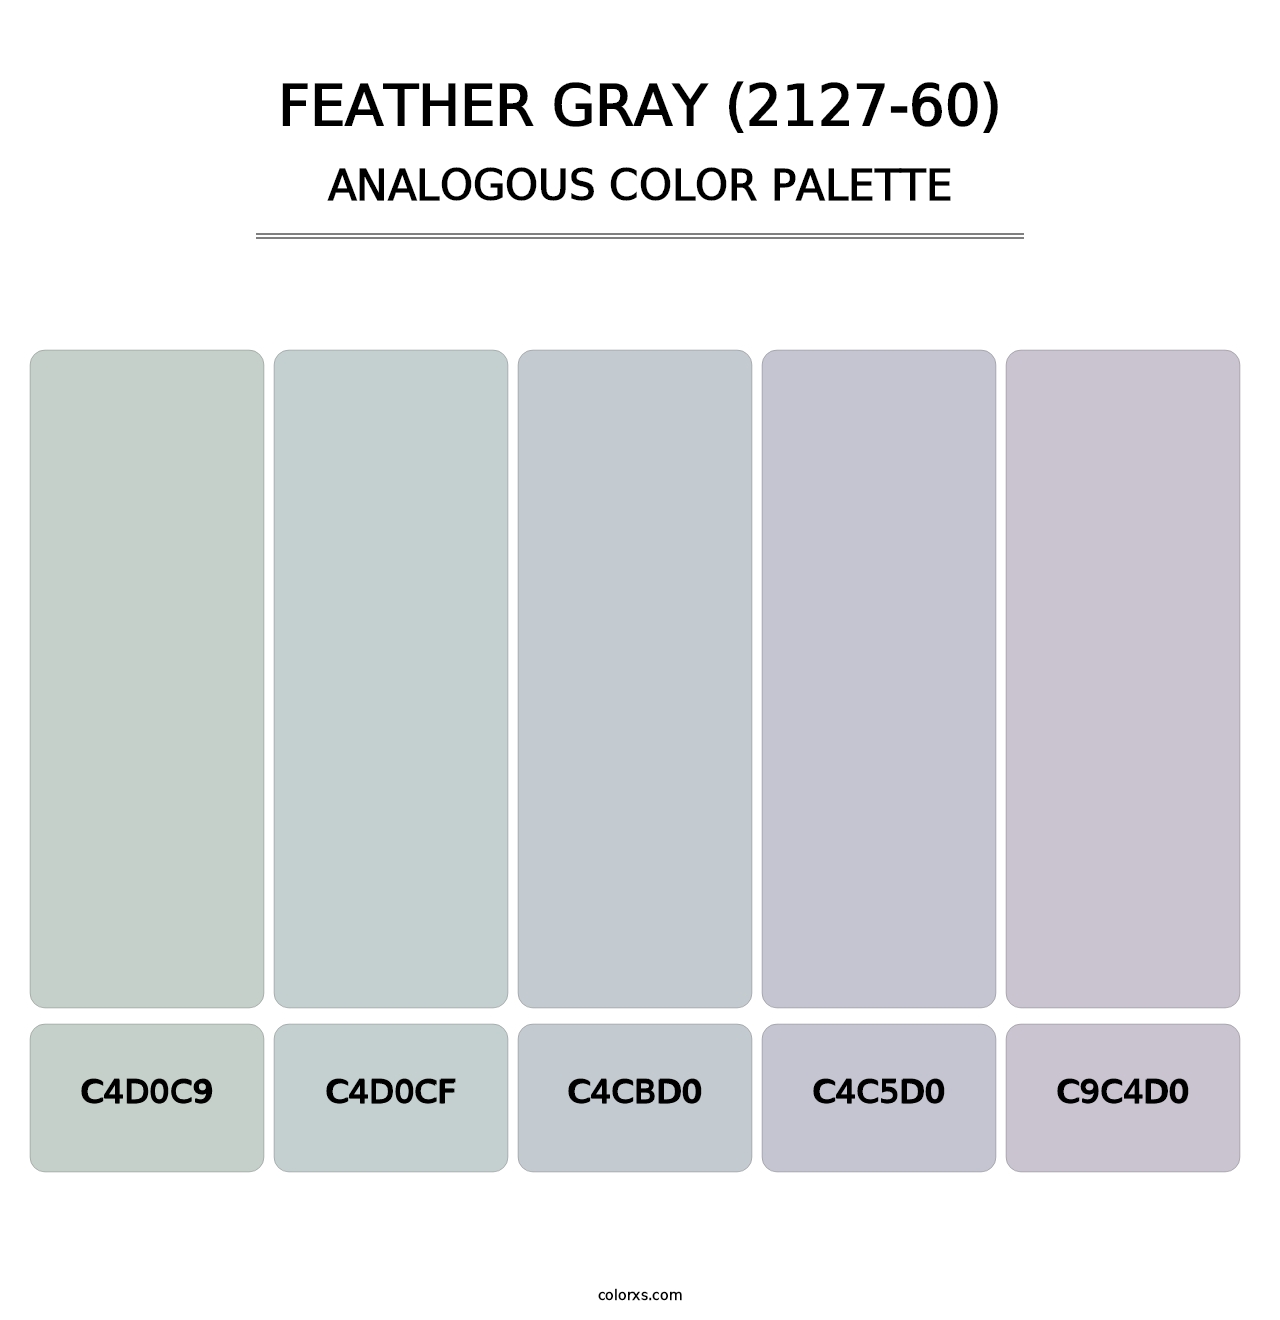 Feather Gray (2127-60) - Analogous Color Palette